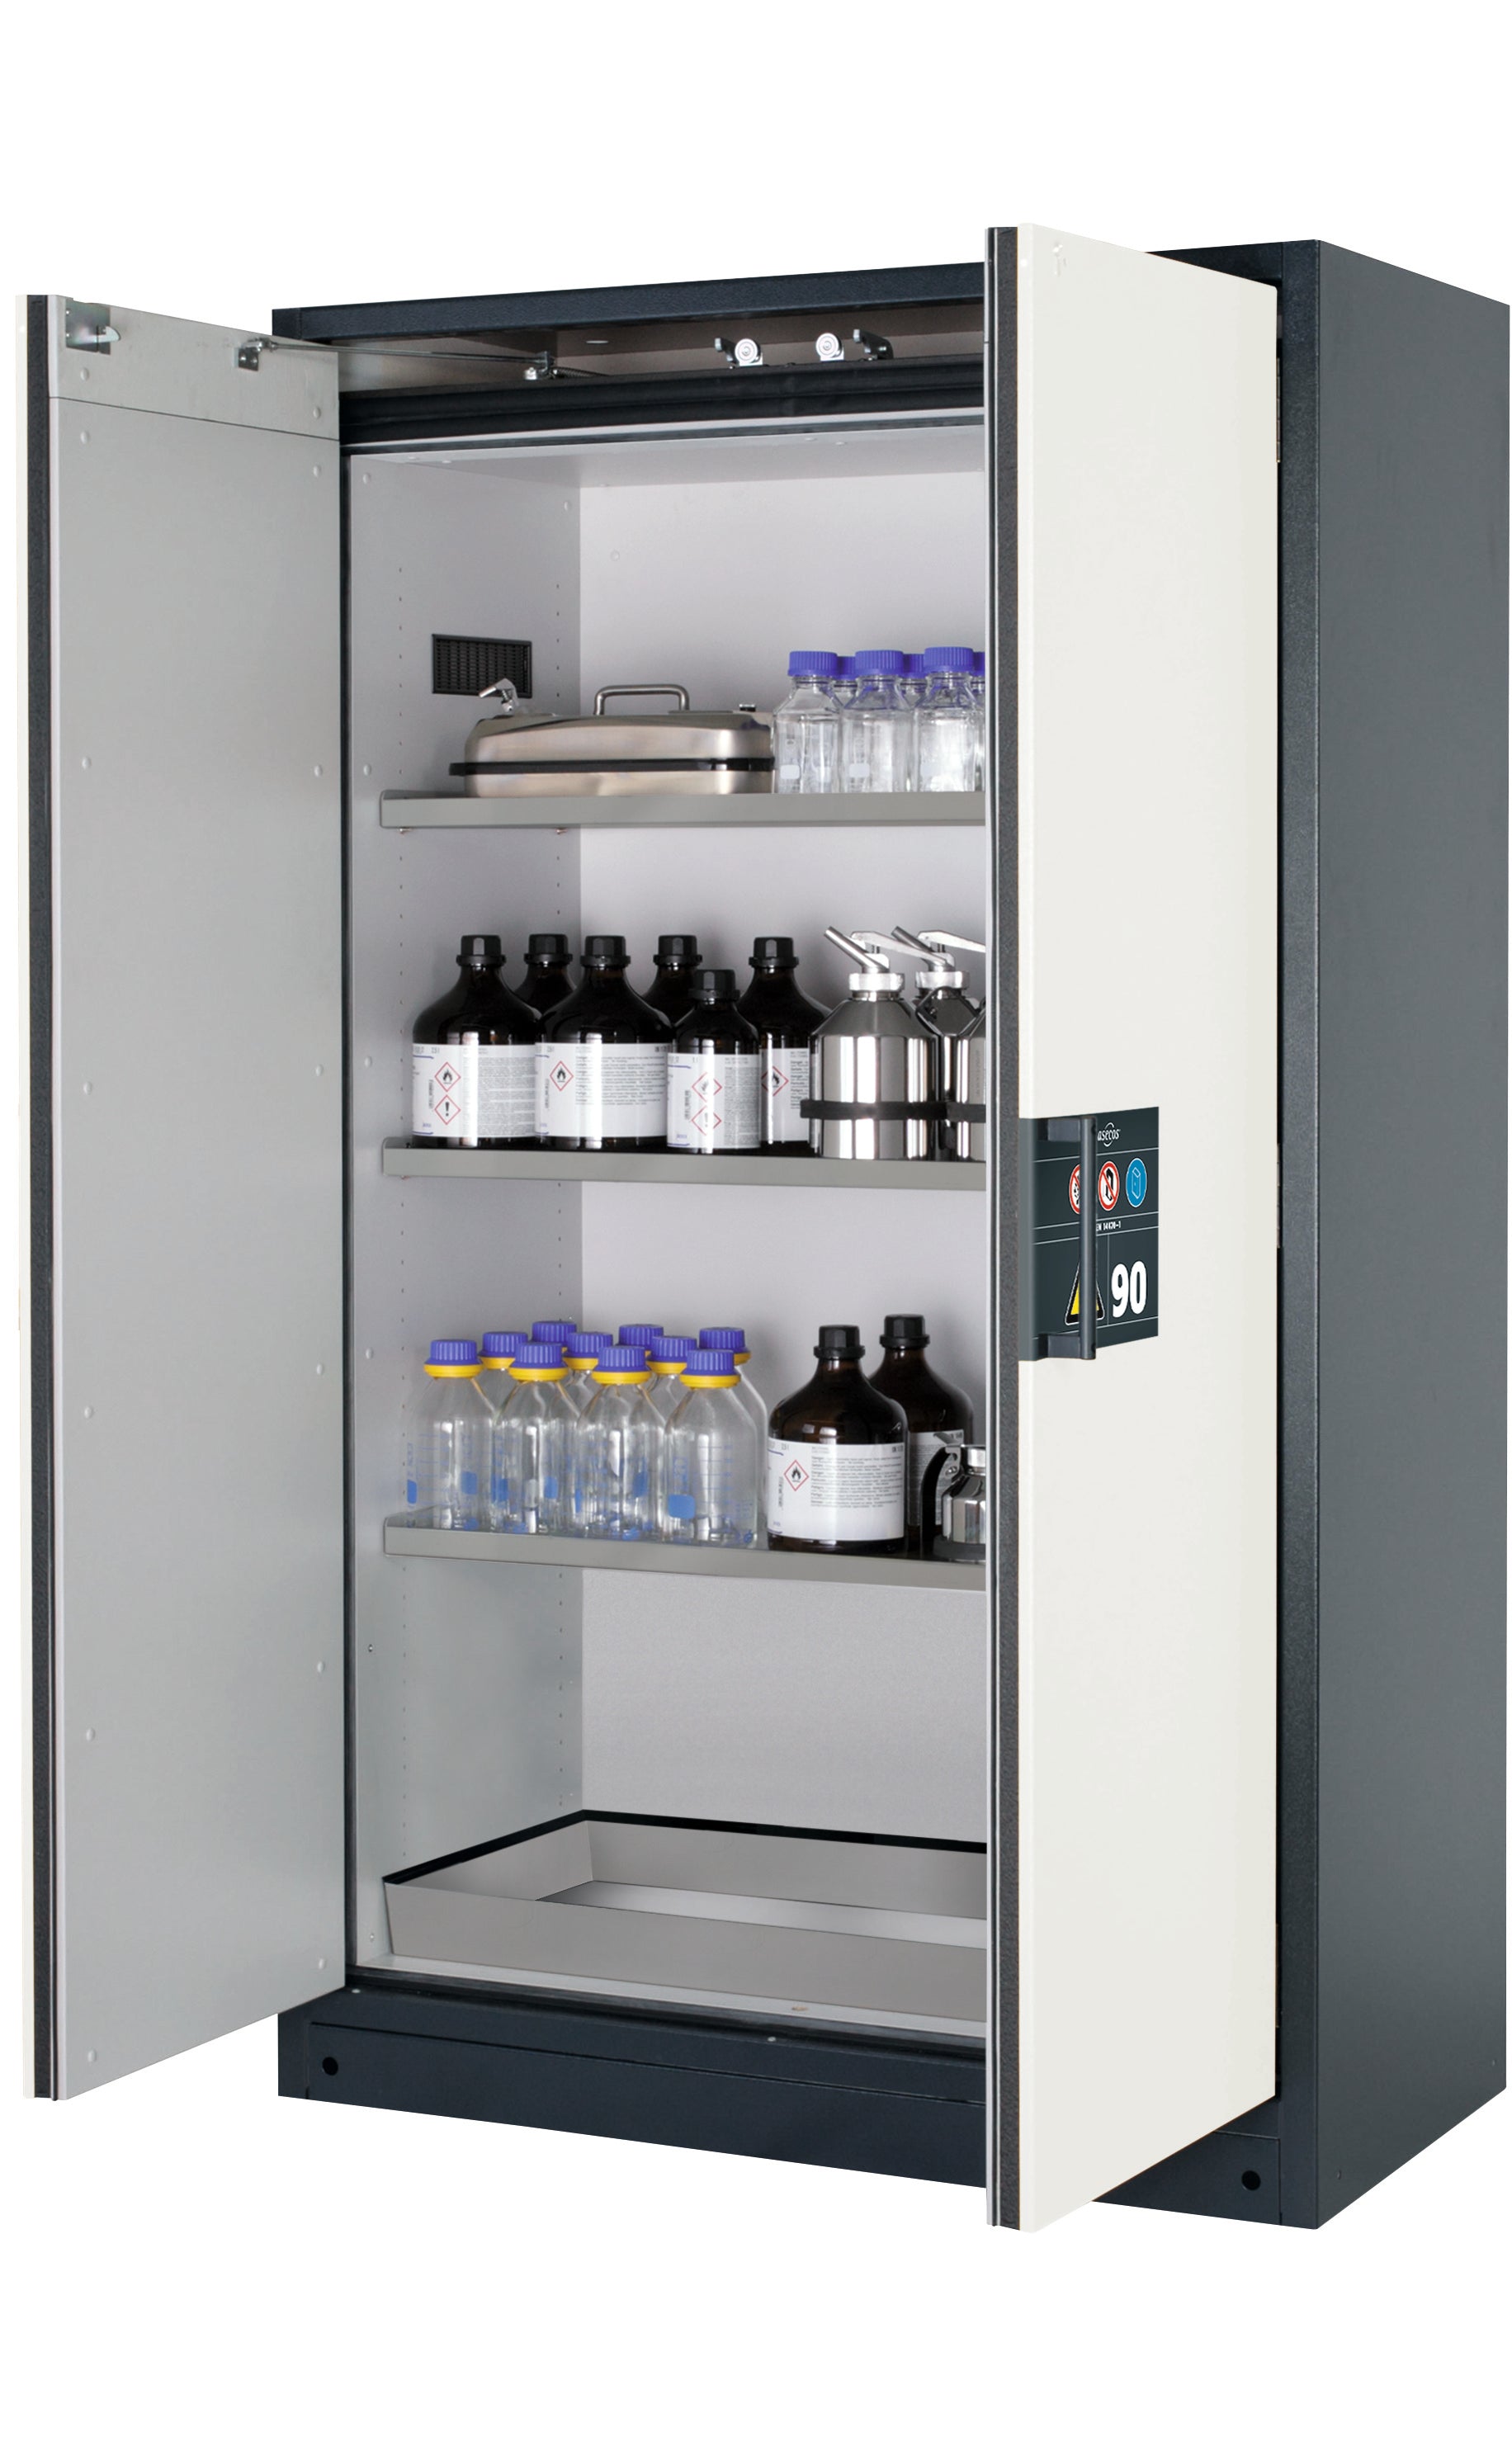 Type 90 safety storage cabinet Q-CLASSIC-90 model Q90.195.120 in pure white RAL 9010 with 3x shelf standard (stainless steel 1.4301),